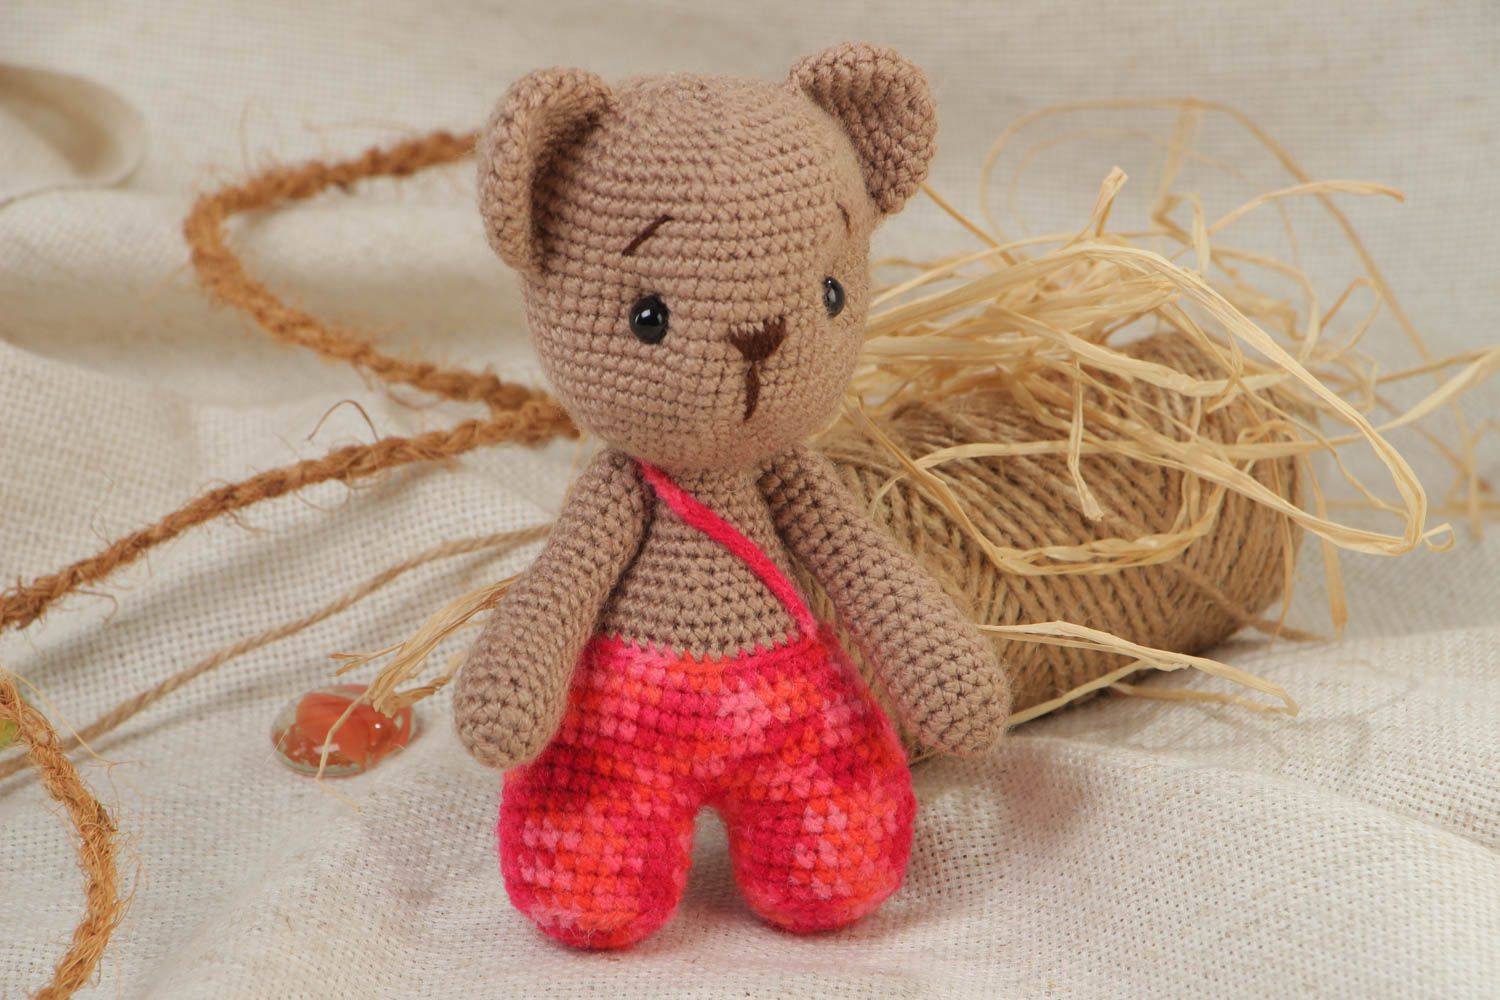 Small handcrafted soft crocheted teddybear for children made using knitting needle photo 1